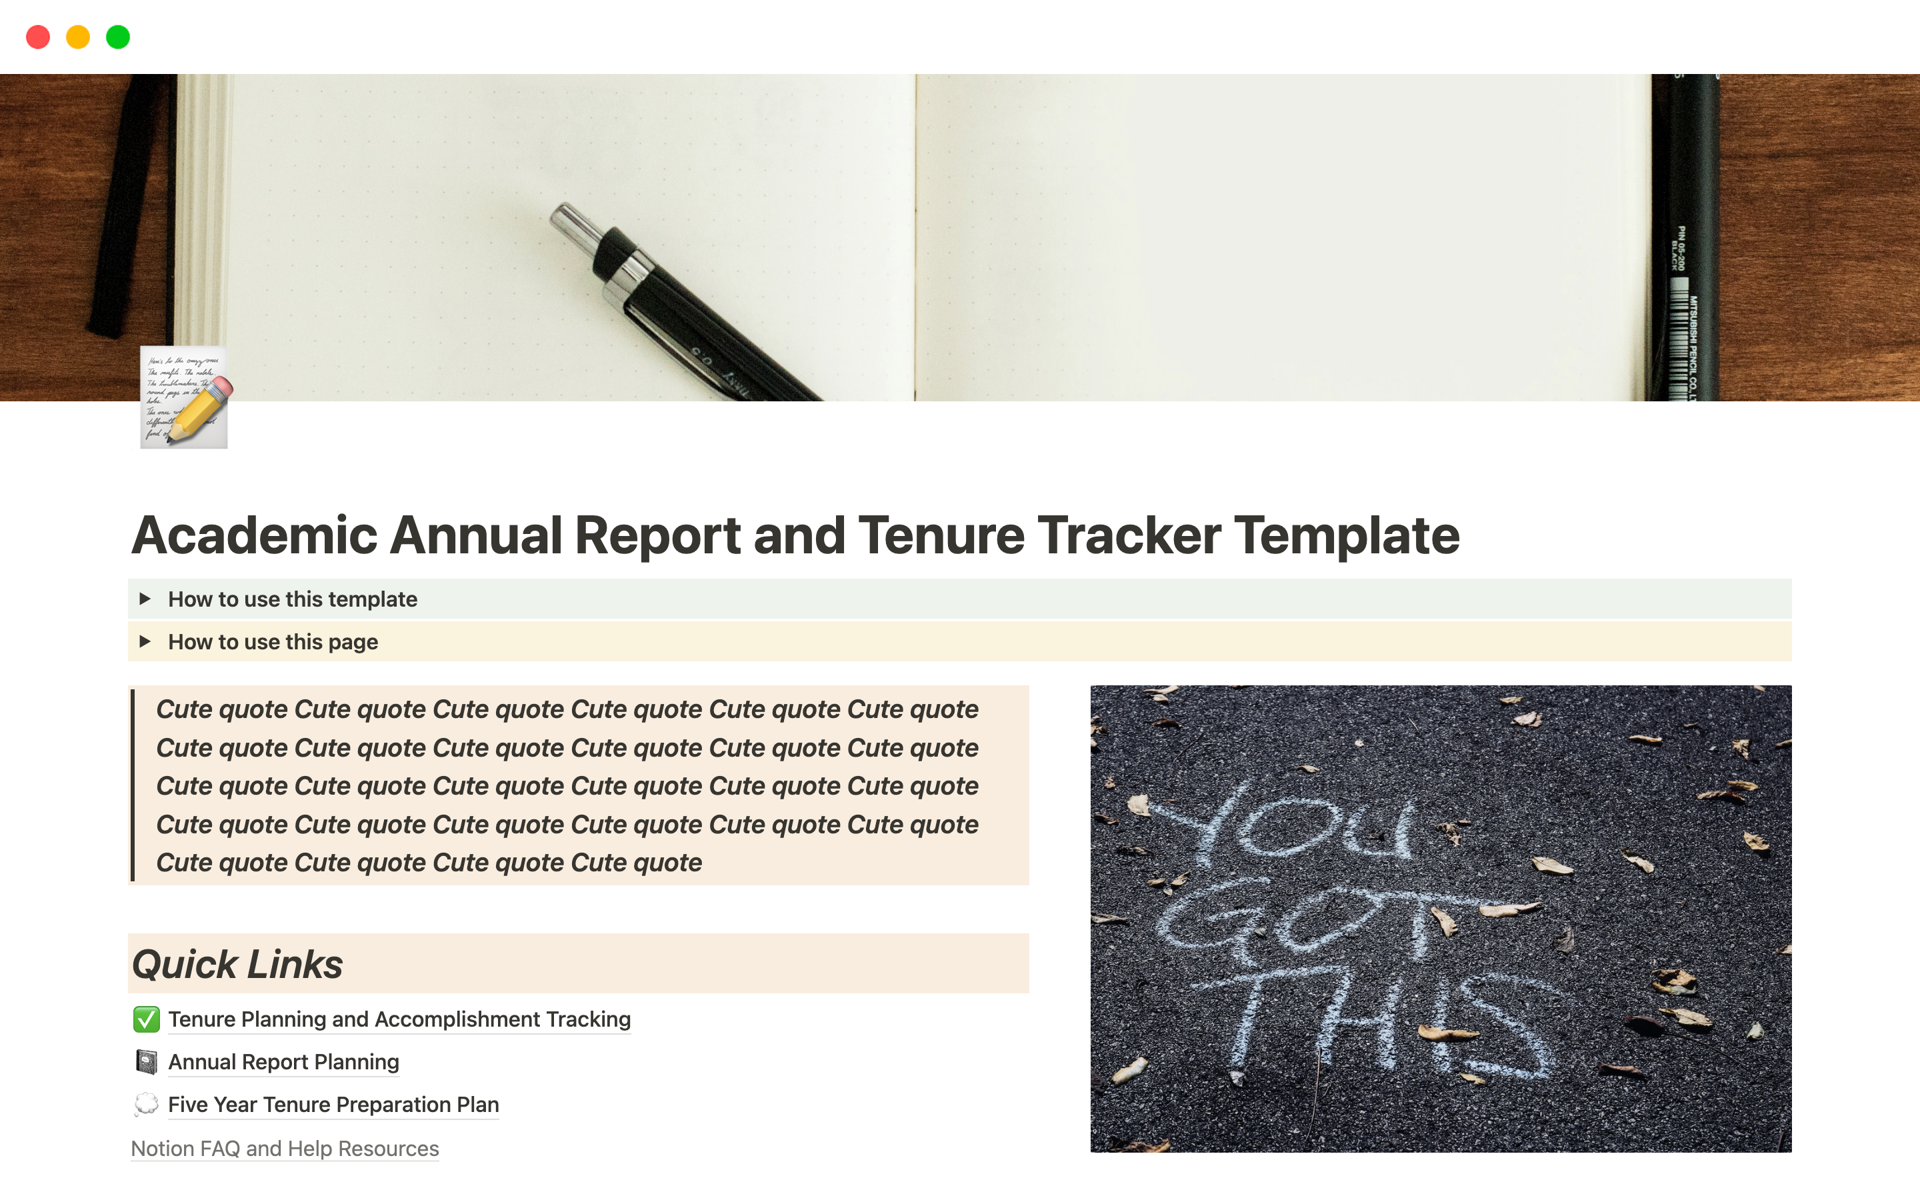 A template preview for Academic Annual Report and Tenure Tracker